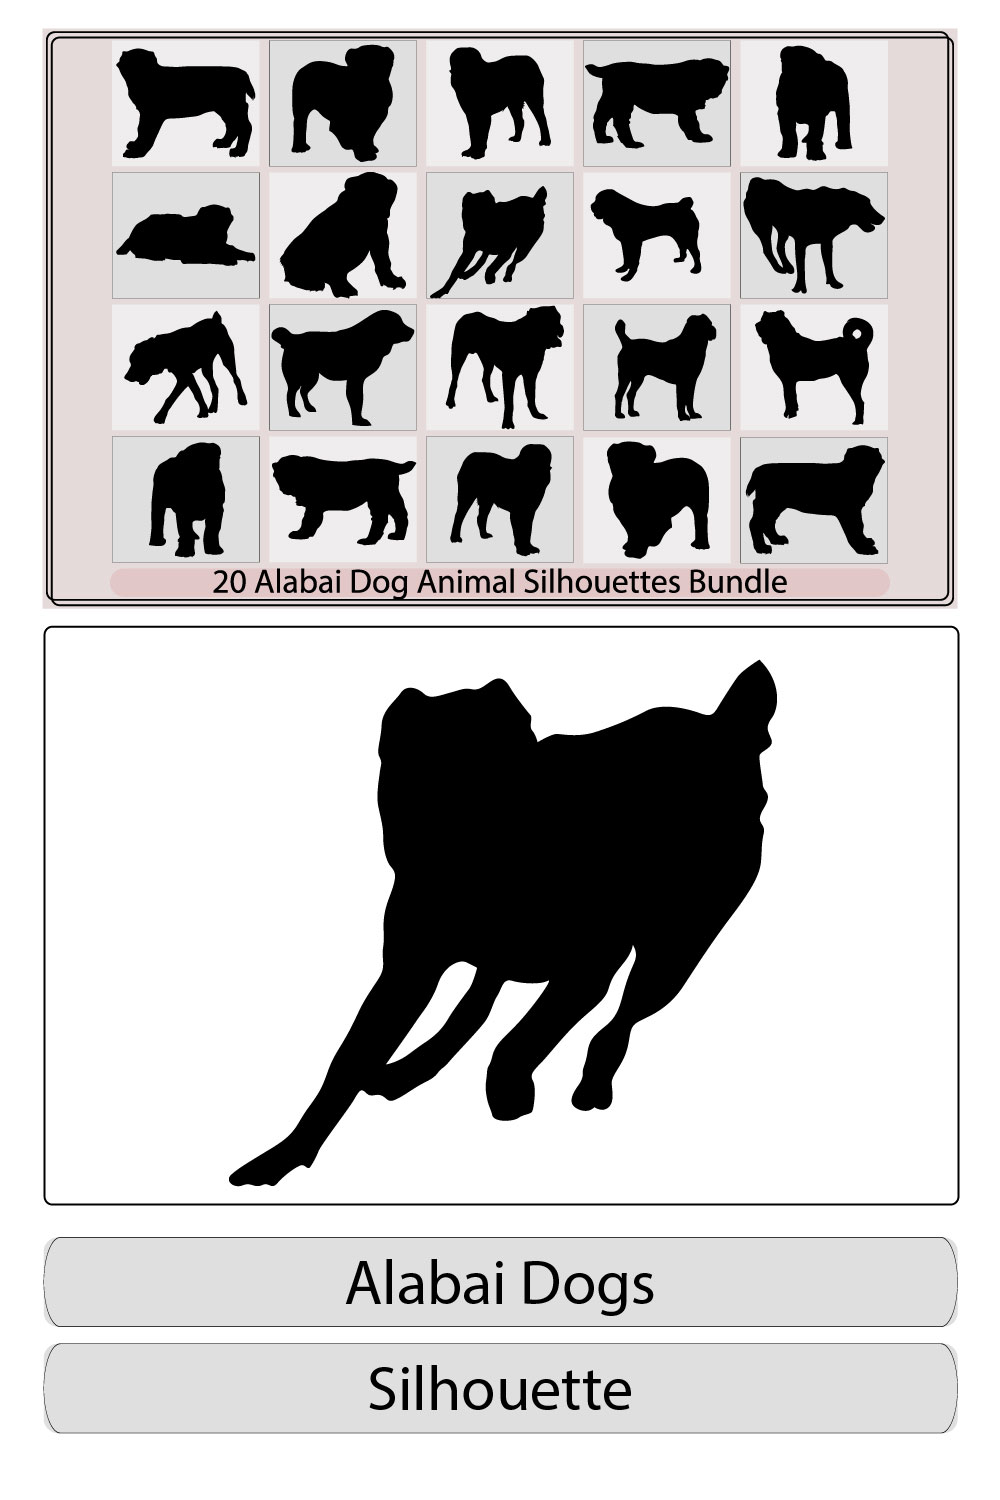 Black dog silhouette Running and jumping central asian shepherd dog puppy Alabai or aziat,Walking central asian shepherd dog puppy,Group of dogs various breed Black dog silhouette Running, standing, walking, jumping, sniffing dogs pinterest preview image.